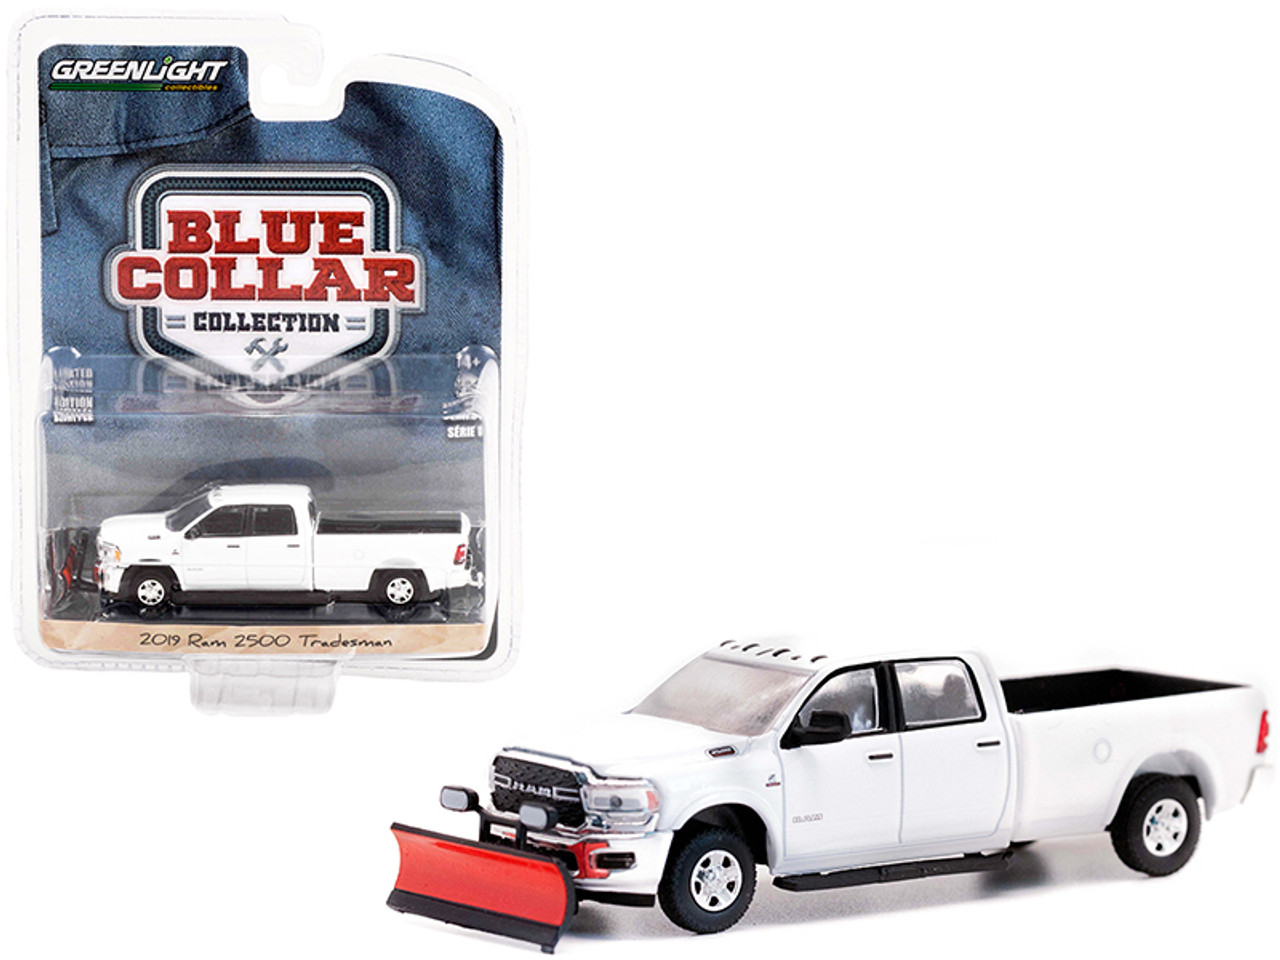 2019 Dodge Ram 2500 Tradesman Pickup Truck with Snow Plow White "Blue Collar Collection" Series 10 1/64 Diecast Model Car by Greenlight